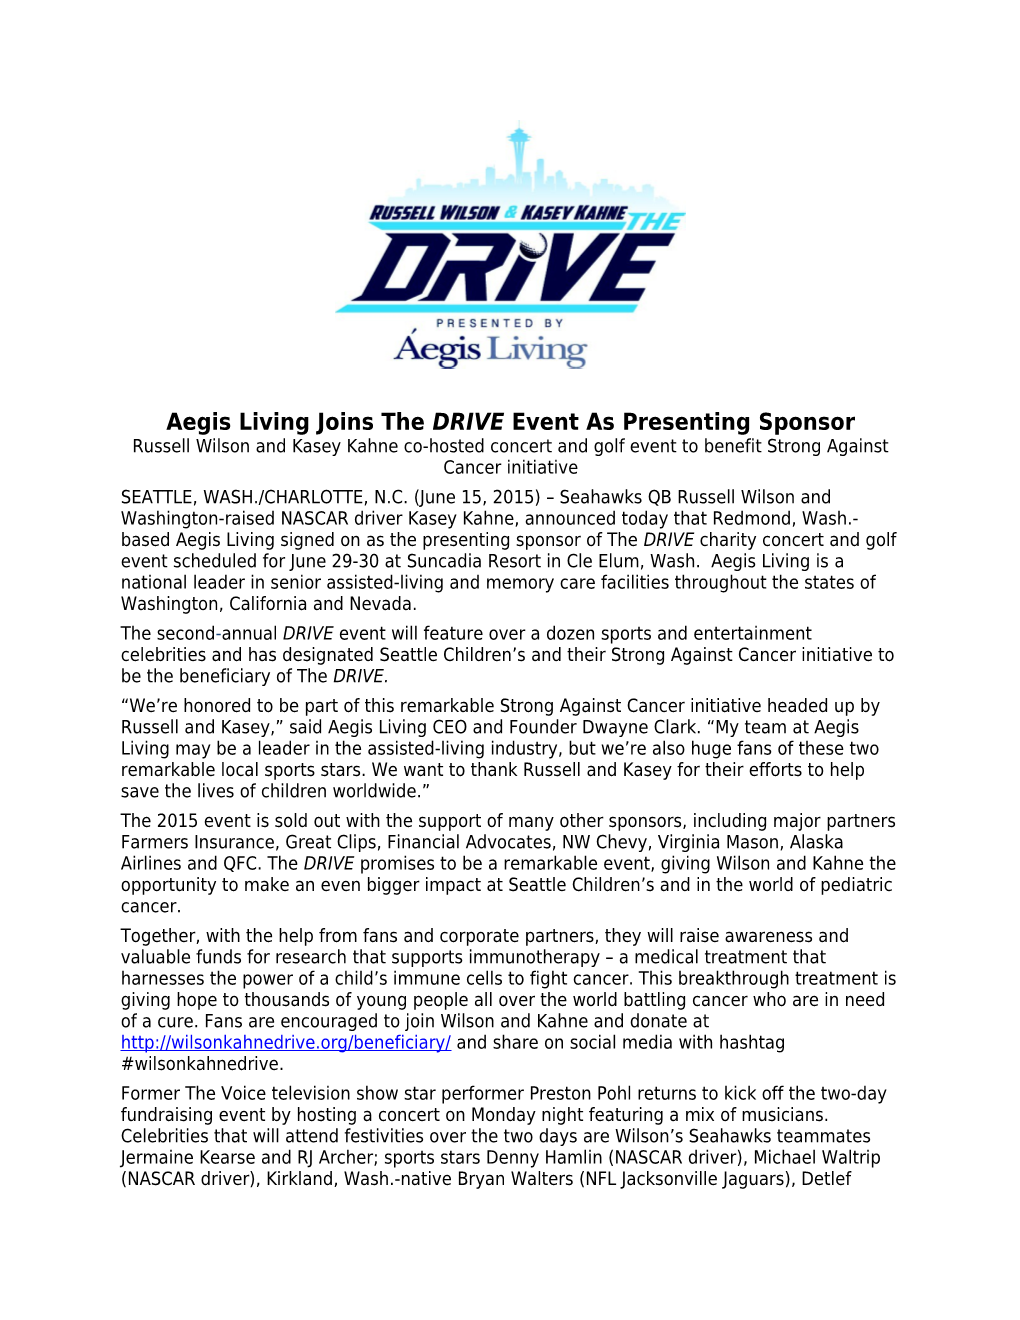 Aegis Living Joins the DRIVE Event As Presenting Sponsor